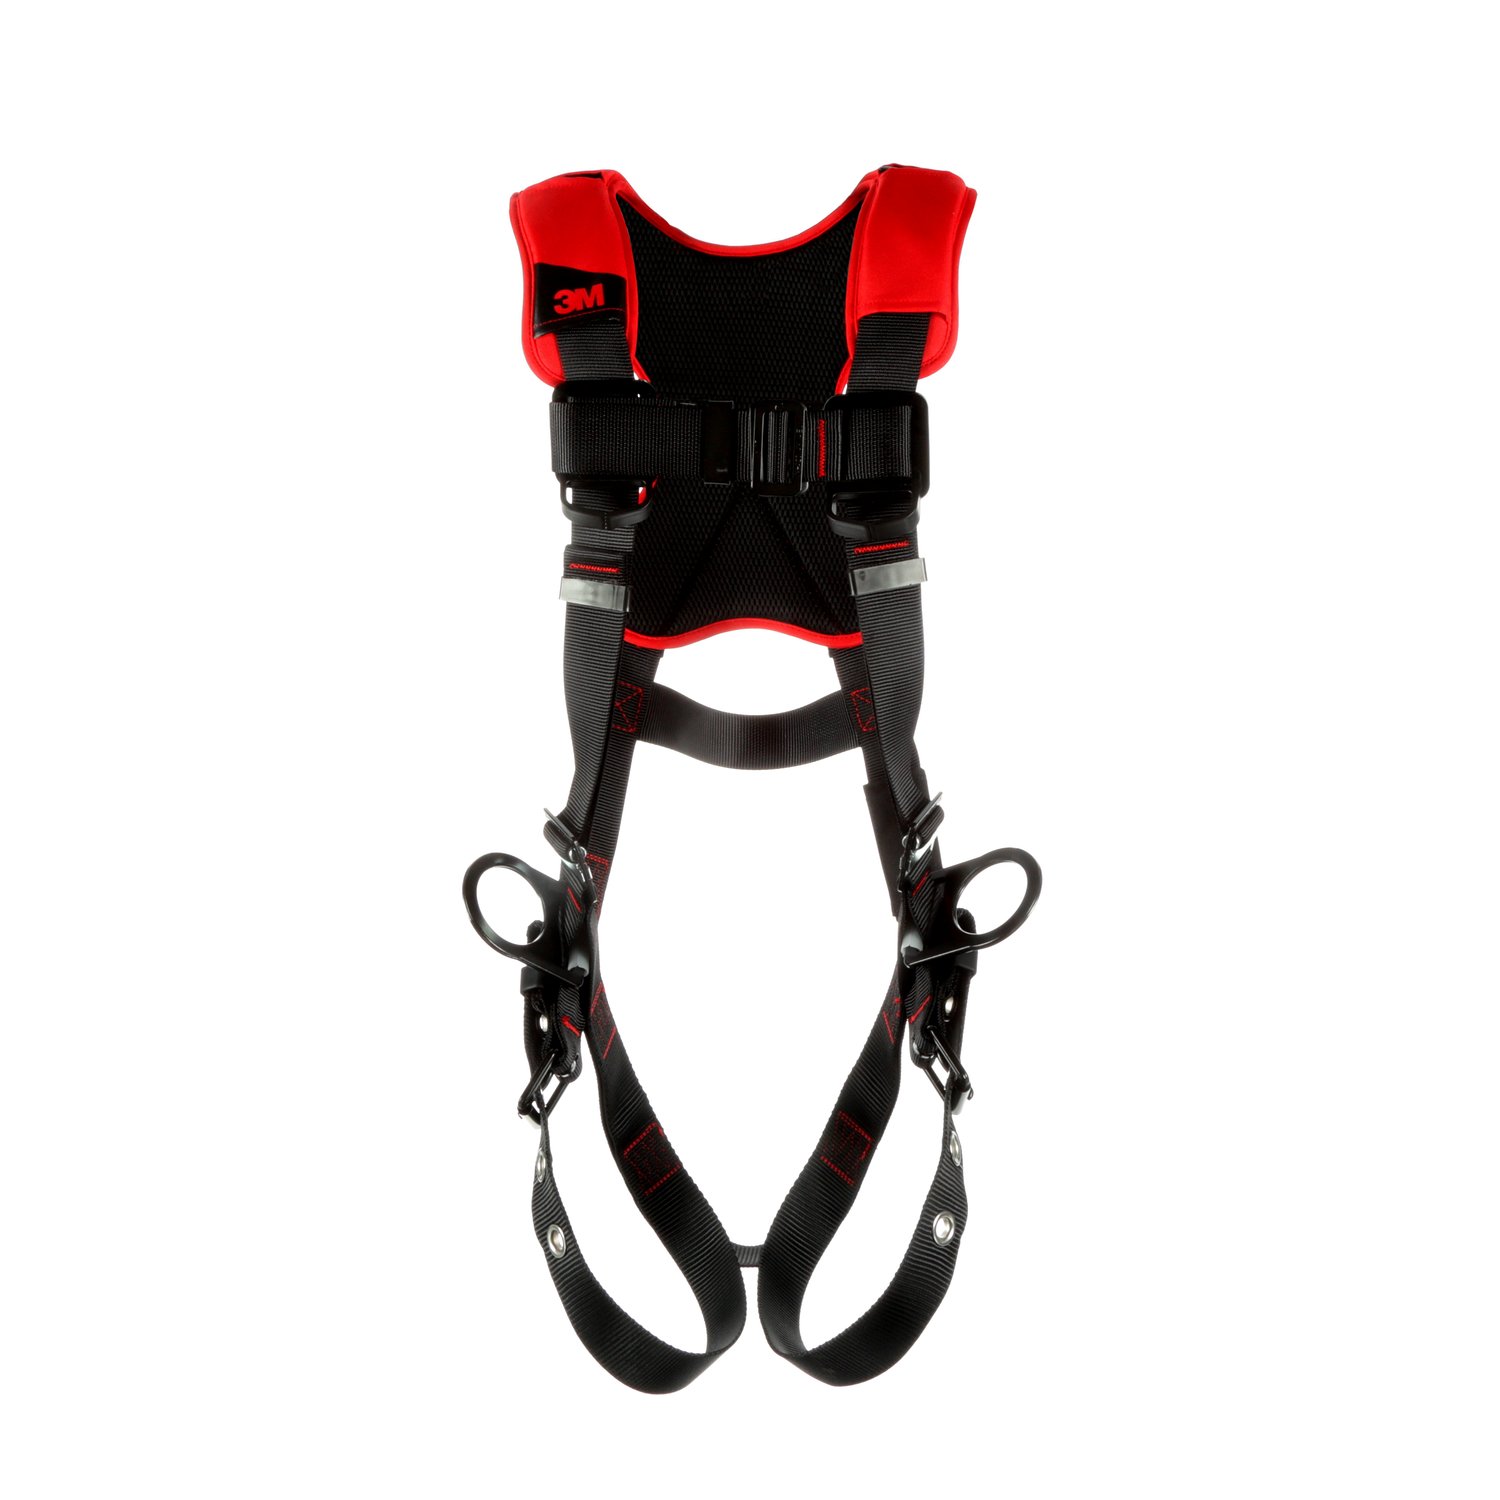 7012816686 - 3M Protecta P200 Comfort Vest Positioning Safety Harness 1161416, 2X